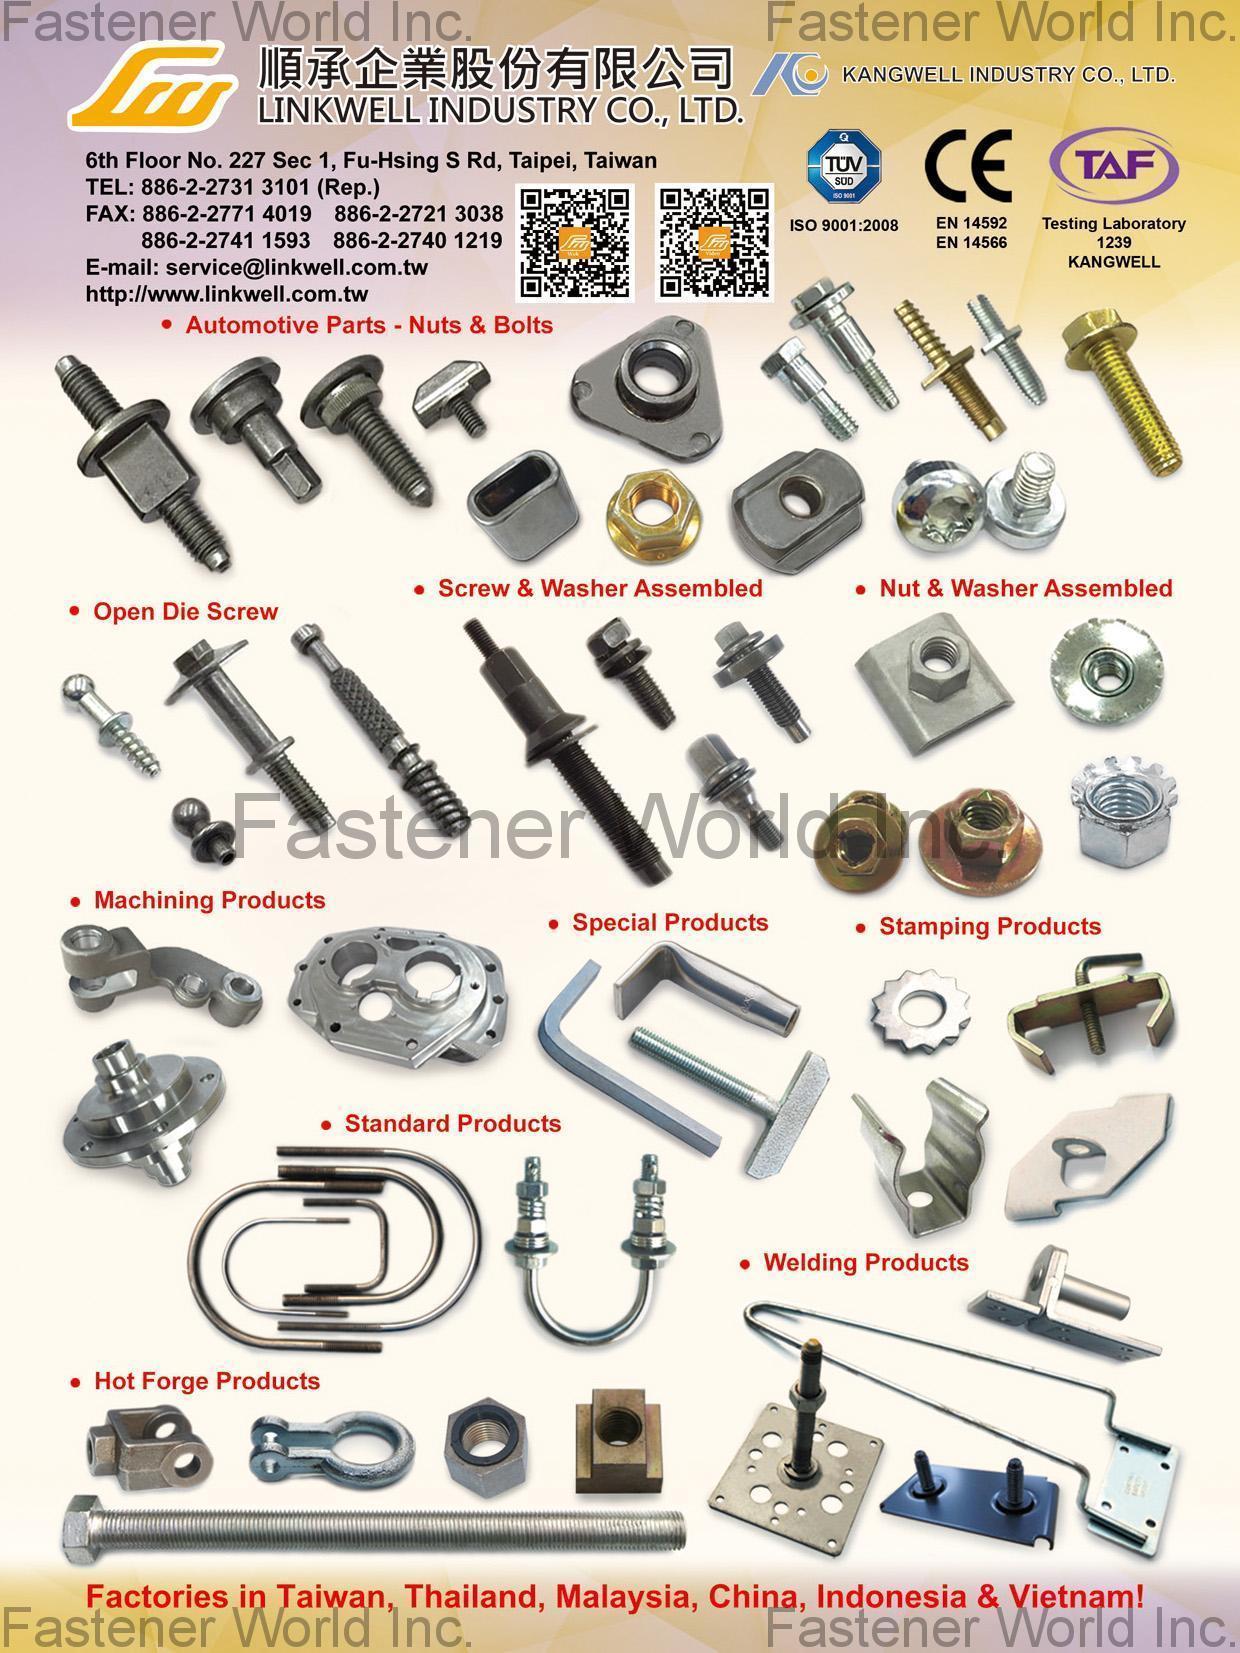 LINKWELL INDUSTRY CO., LTD. , Automotive Parts, Open Die Screws, Machining Products, Special Products, Stamping Products, Screw & Washer Assembled, Hot Forge Products, Welding Products, Nut & Washer Assembled , Automotive Parts